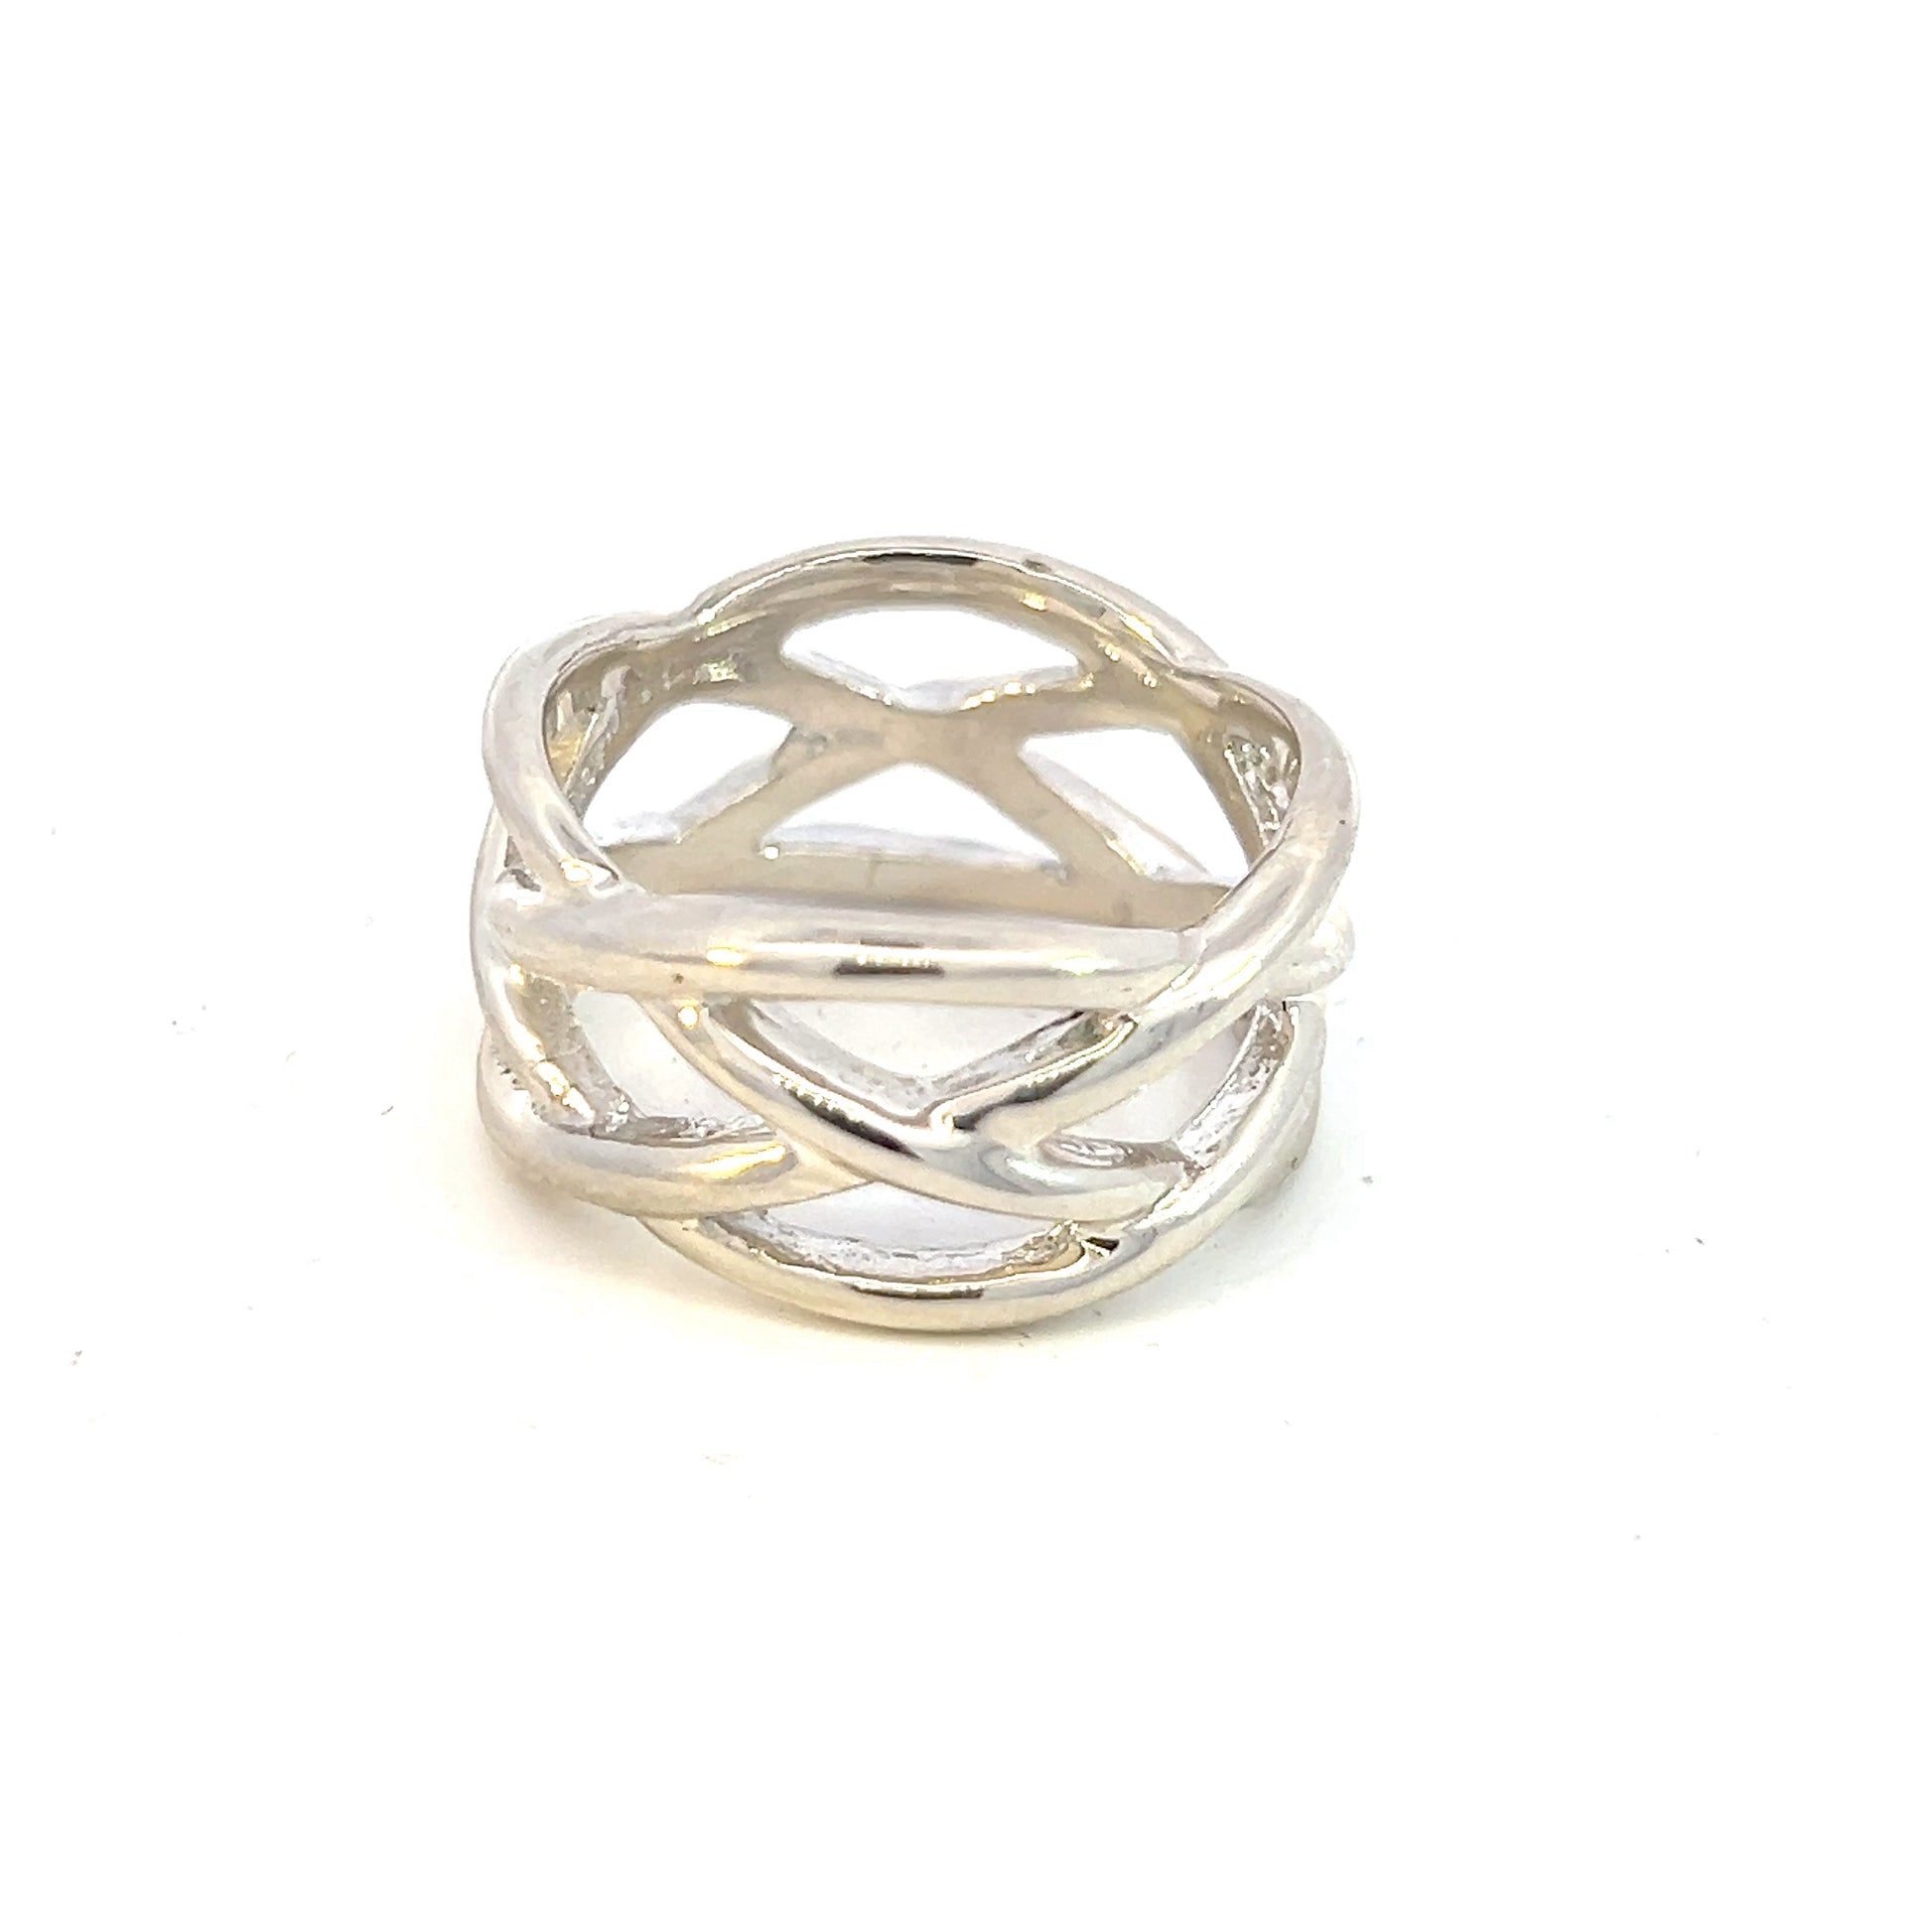 Tiffany & Co Estate Celtic Knot Ring Size 10 Sterling Silver 12 mm TIF566 - Certified Fine Jewelry